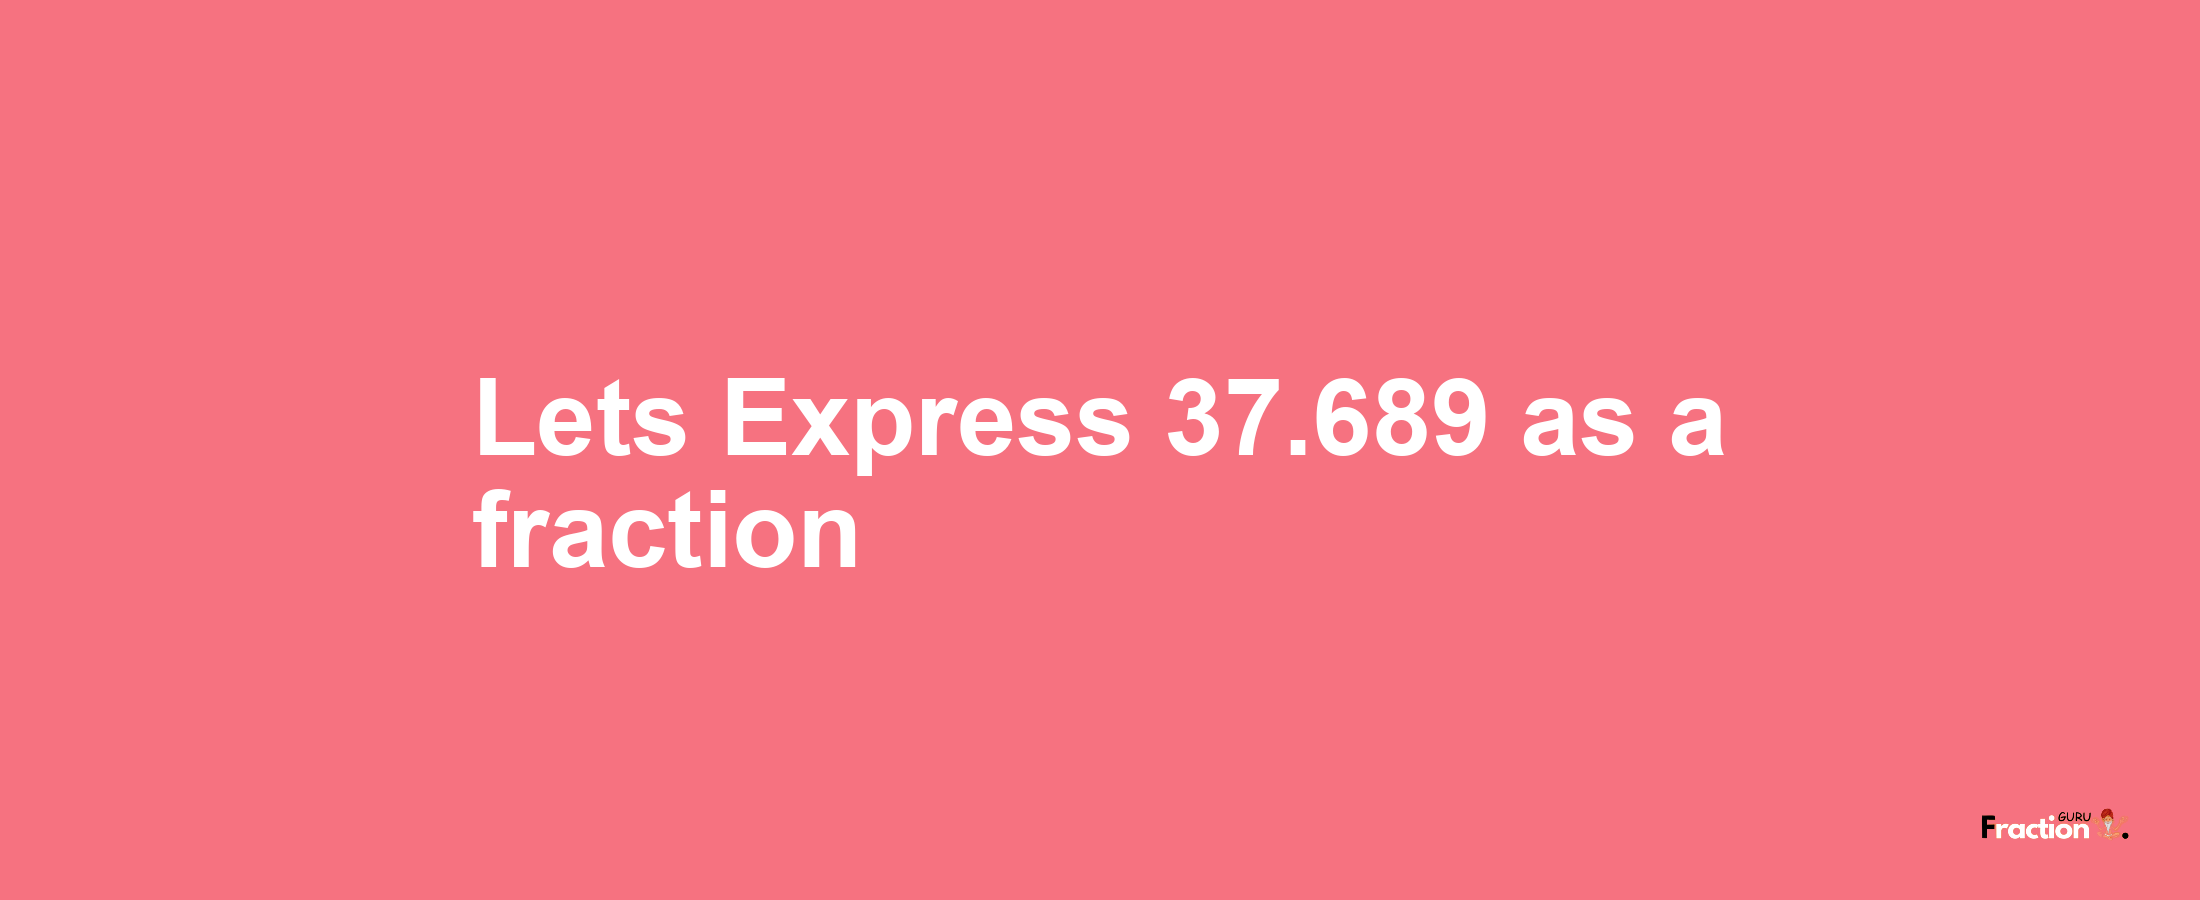 Lets Express 37.689 as afraction